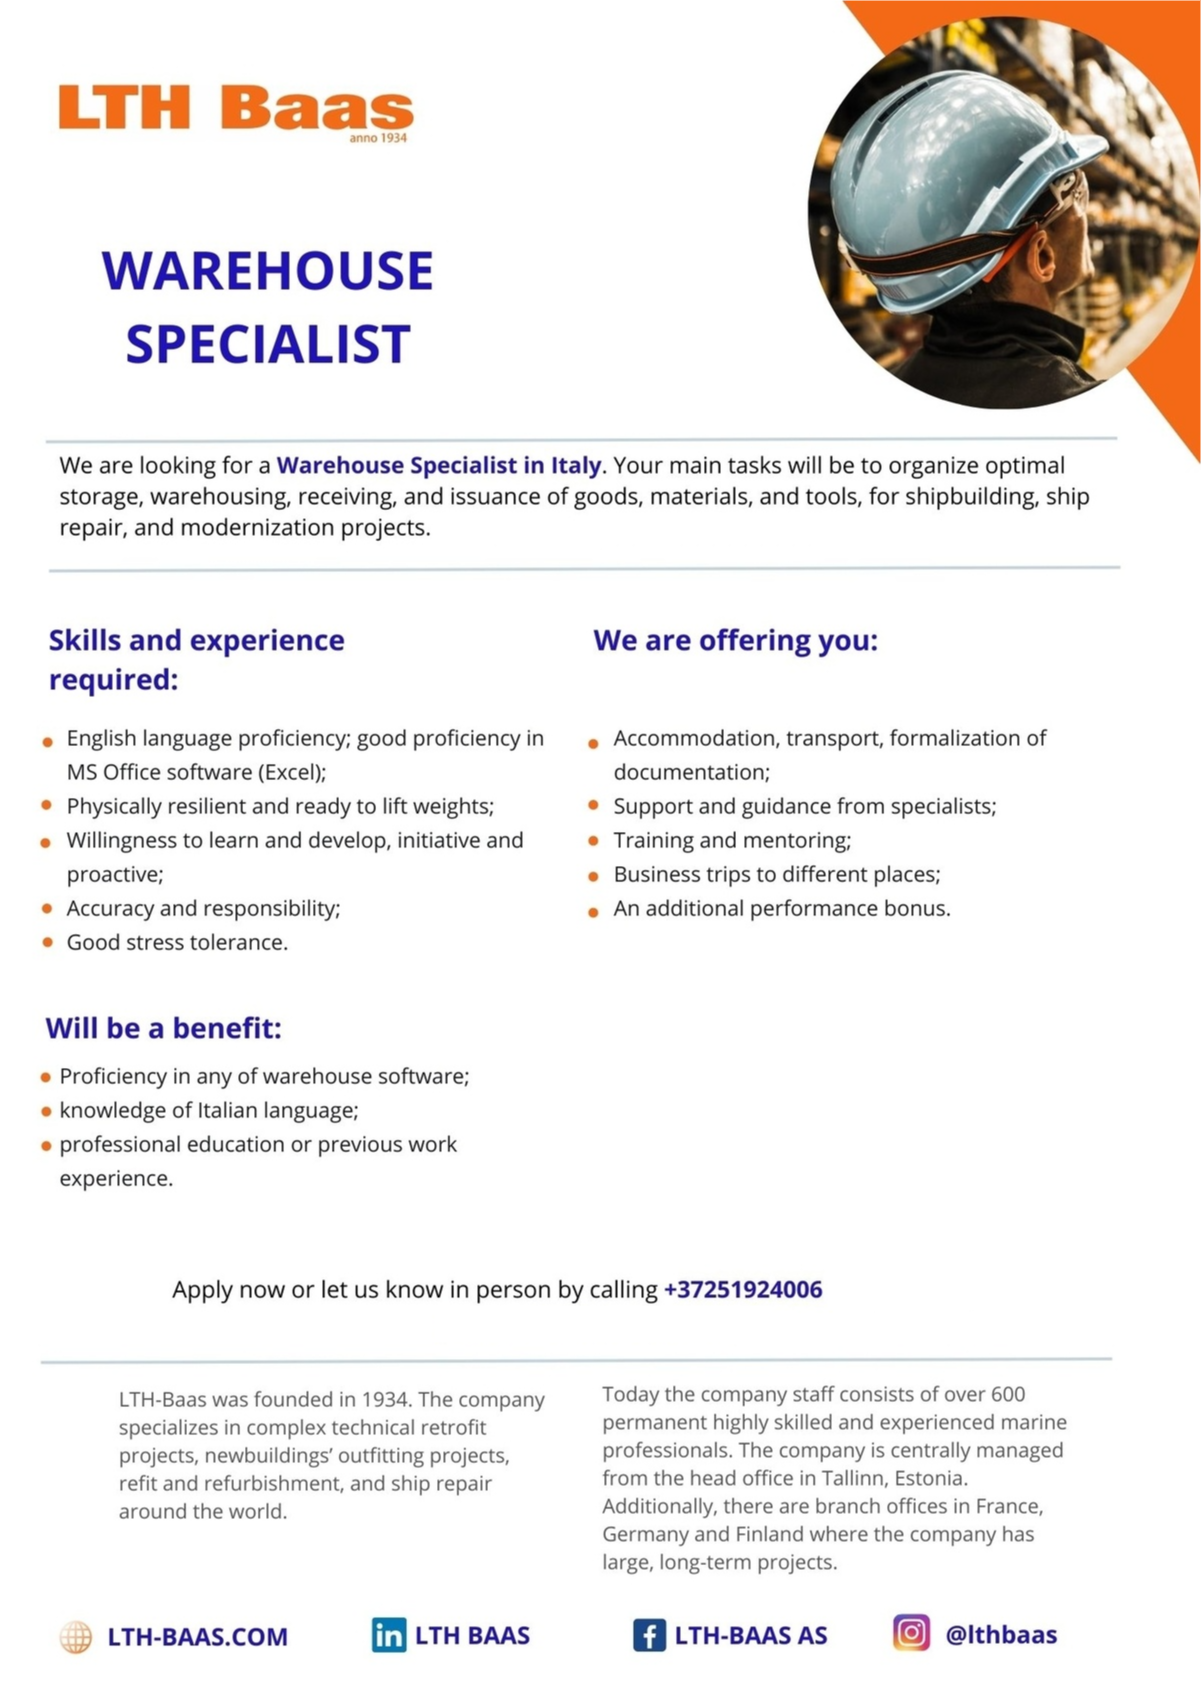 LTH-Baas AS Warehouse Specialist